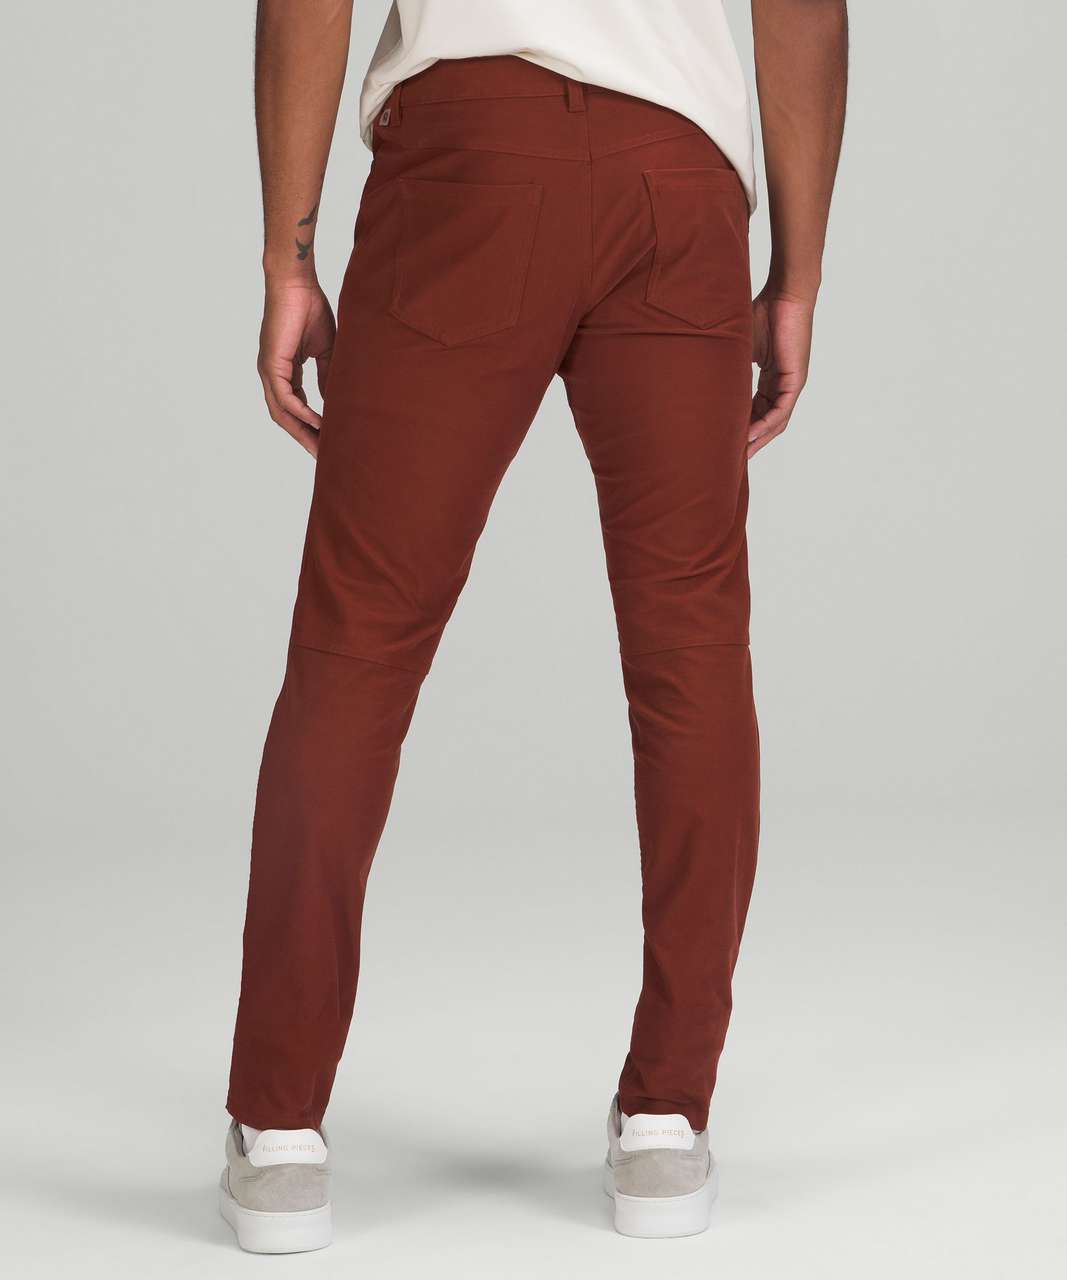 The word for today was layers: ABC Skinny-Fit Pant 32” * Utilitech